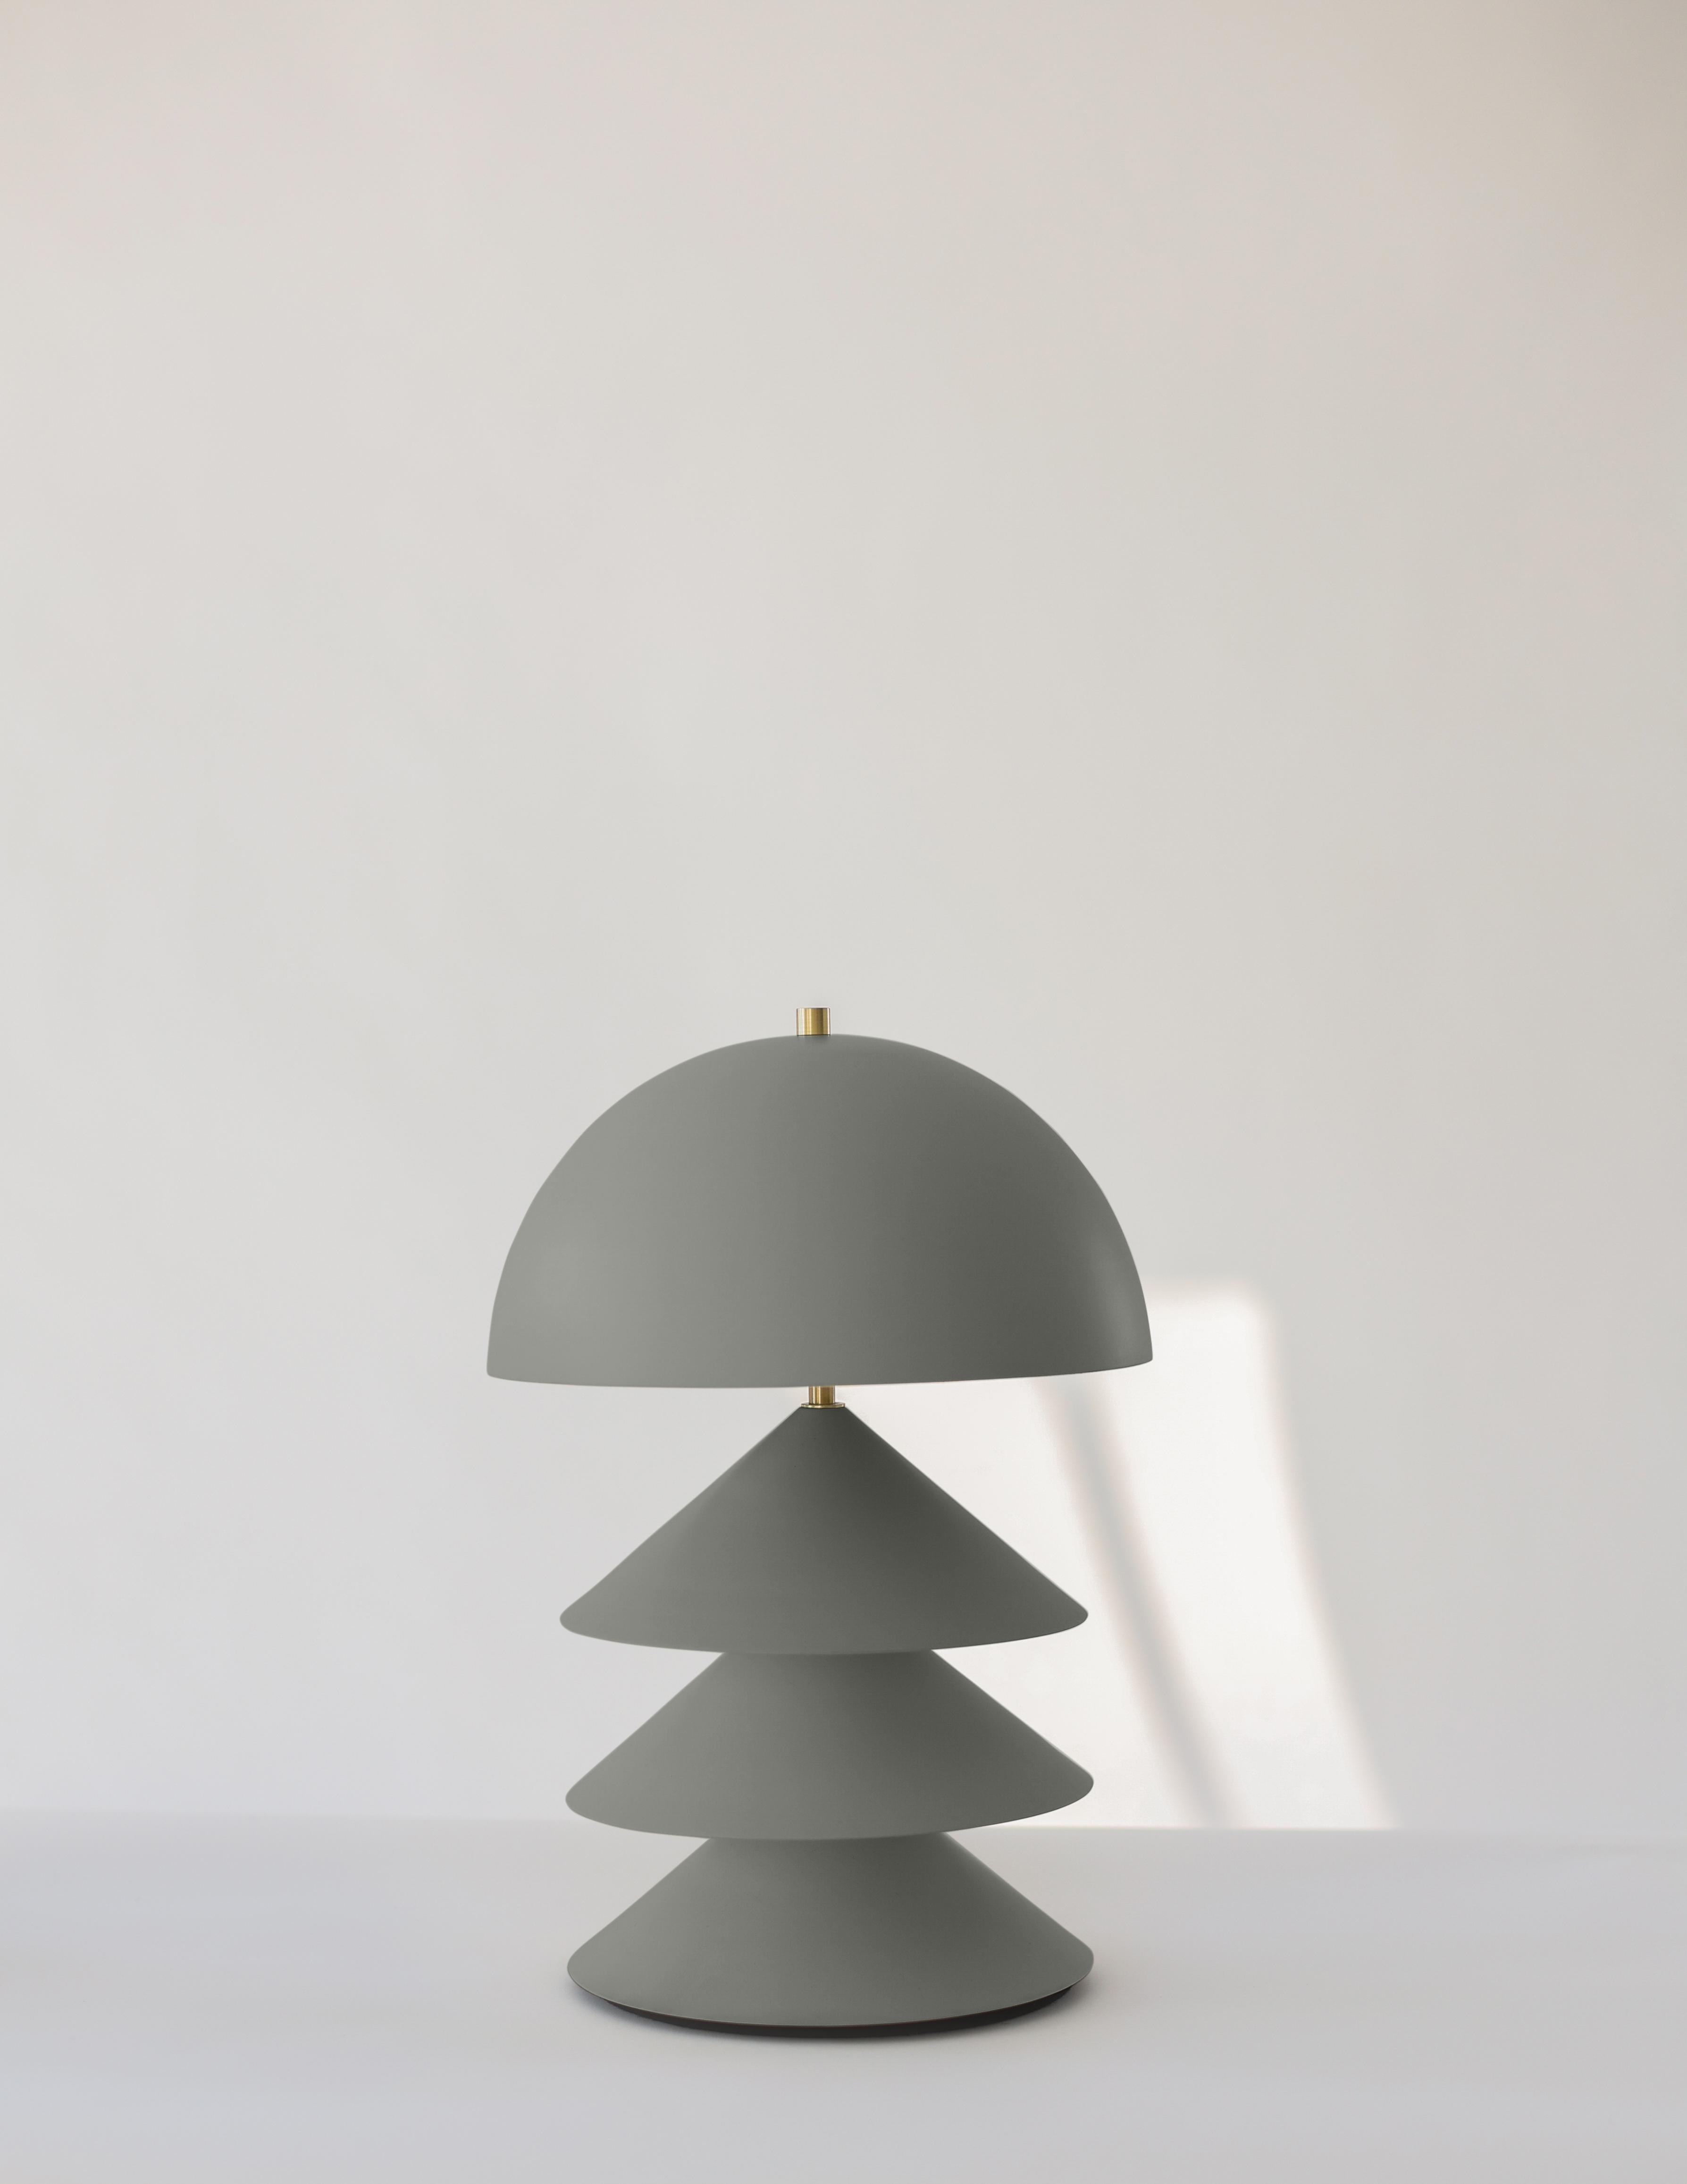 Stacked Bone and Brass Powder-Coated Table Lamp with Peekaboo Silver Leaf Shade For Sale 5